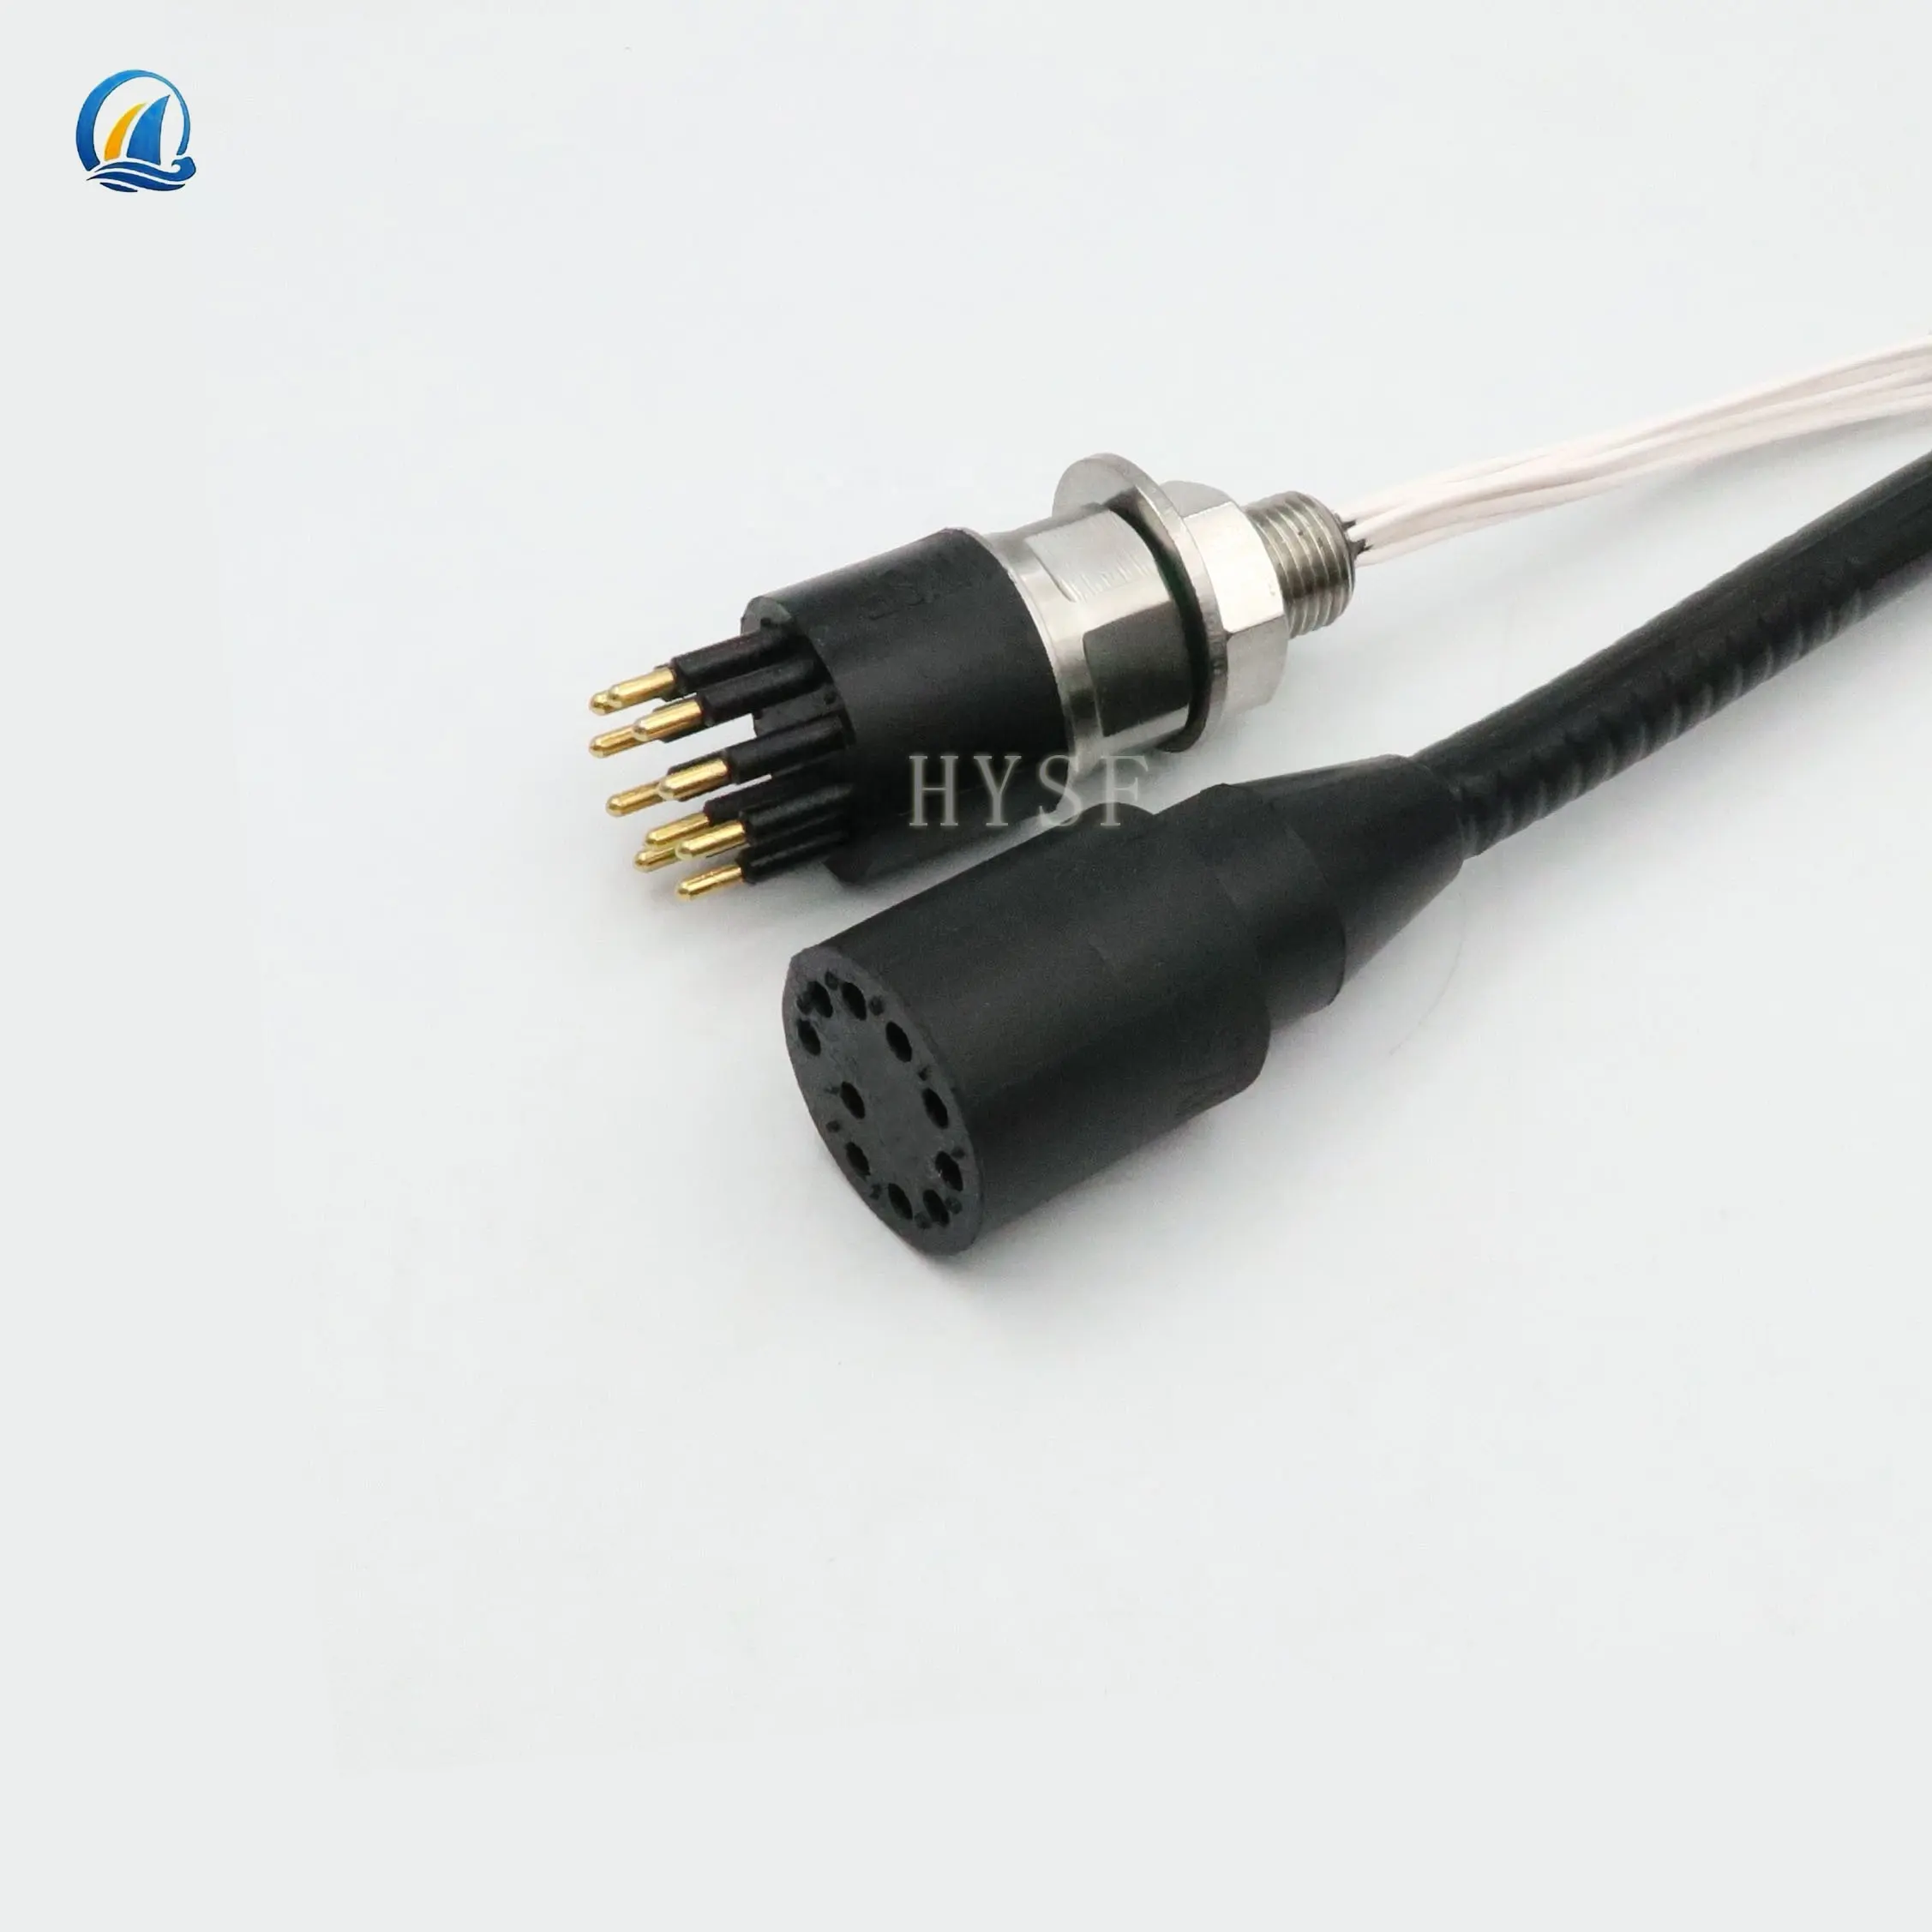 70MPA Pluggable Wet Subconn Micro Circular MCBH12-16M MCIL12-16F Underwater Connector China Ocean Hoist Sail Production